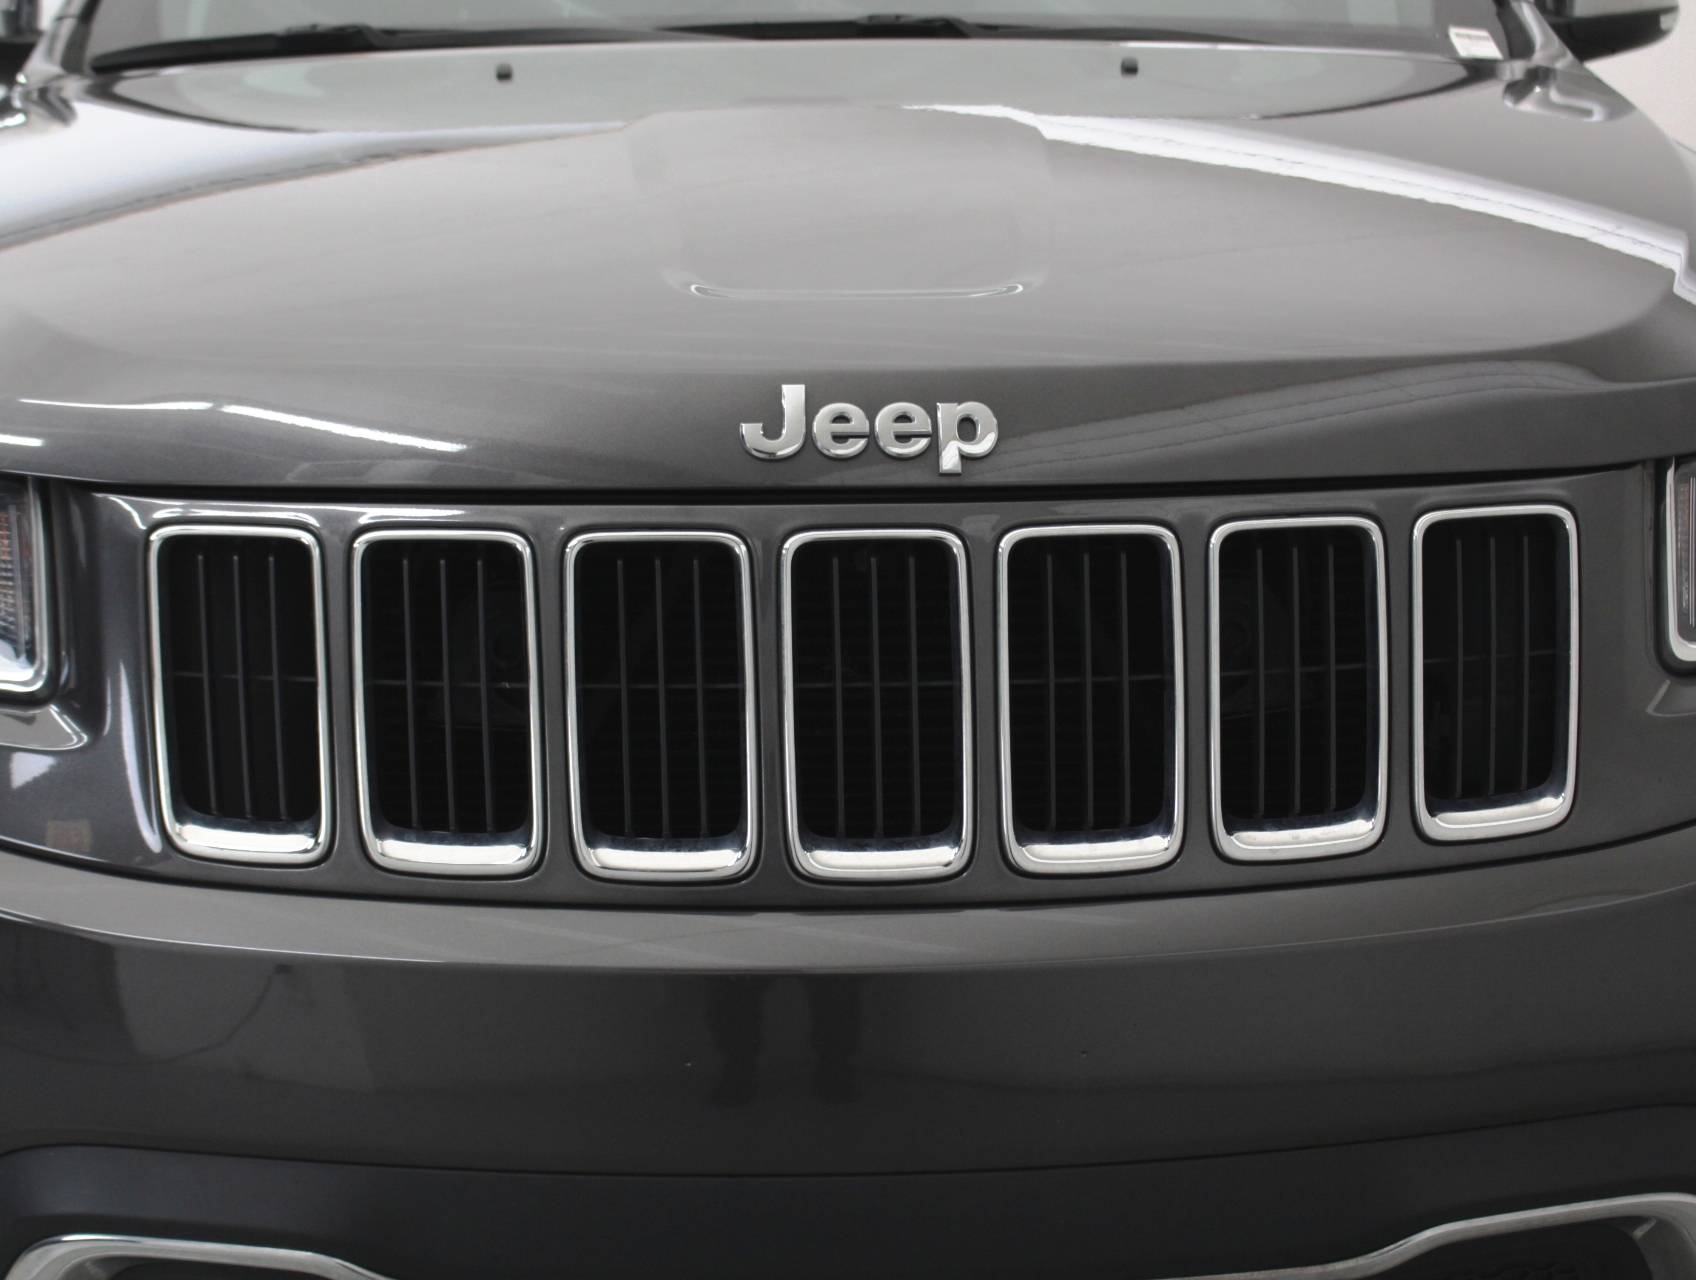 Florida Fine Cars - Used JEEP GRAND CHEROKEE 2015 MARGATE LIMITED